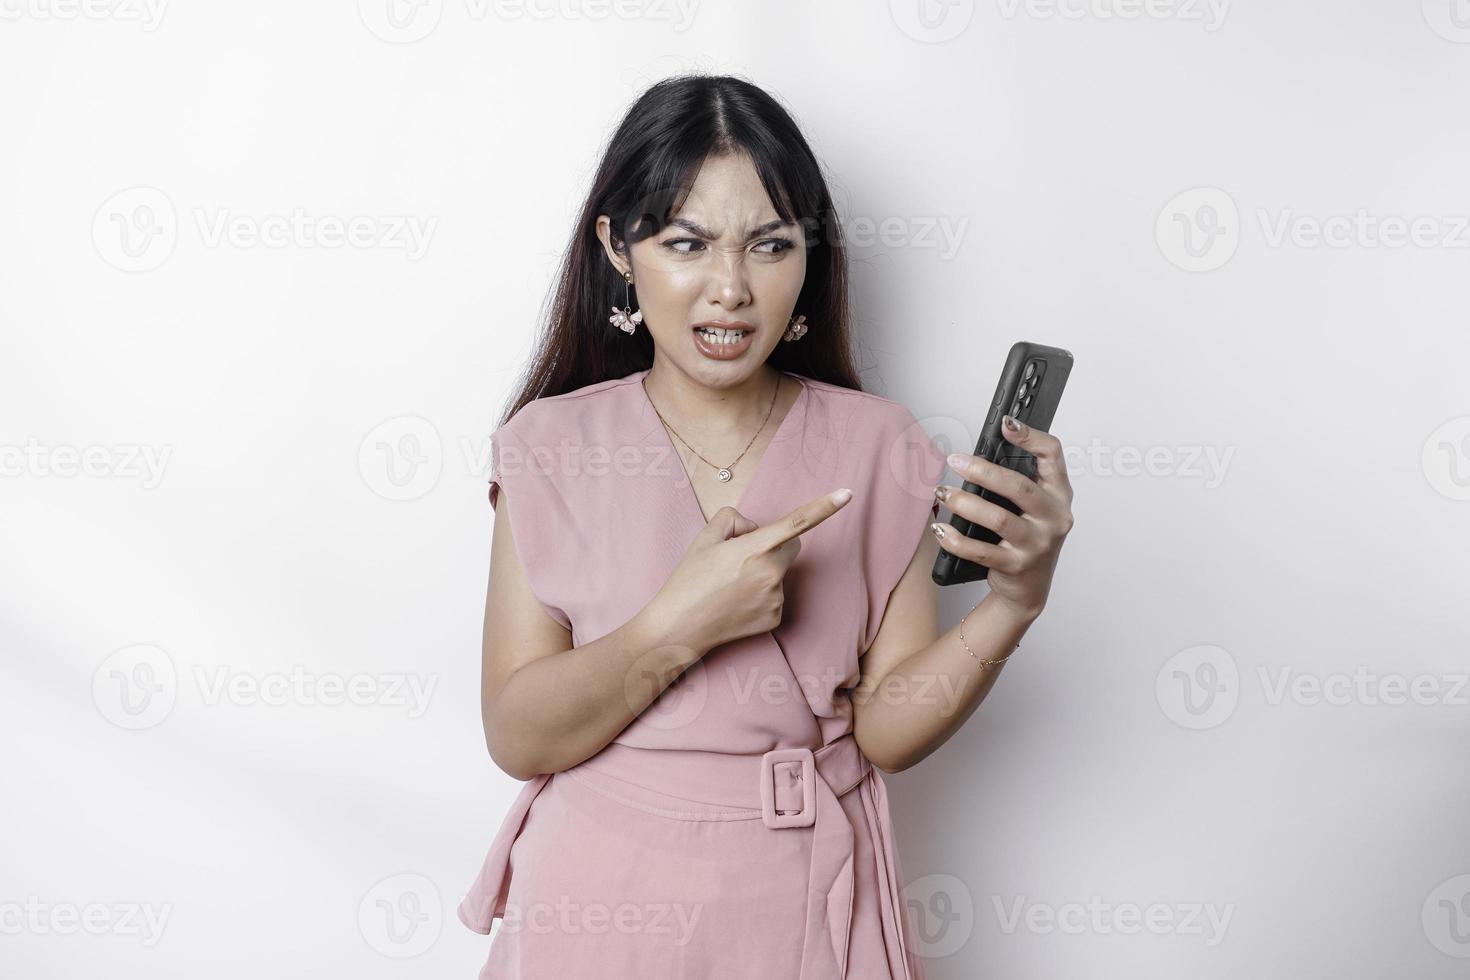 A dissatisfied young Asian woman dressed in pink, looks disgruntled with irritated face expressions holding her phone photo